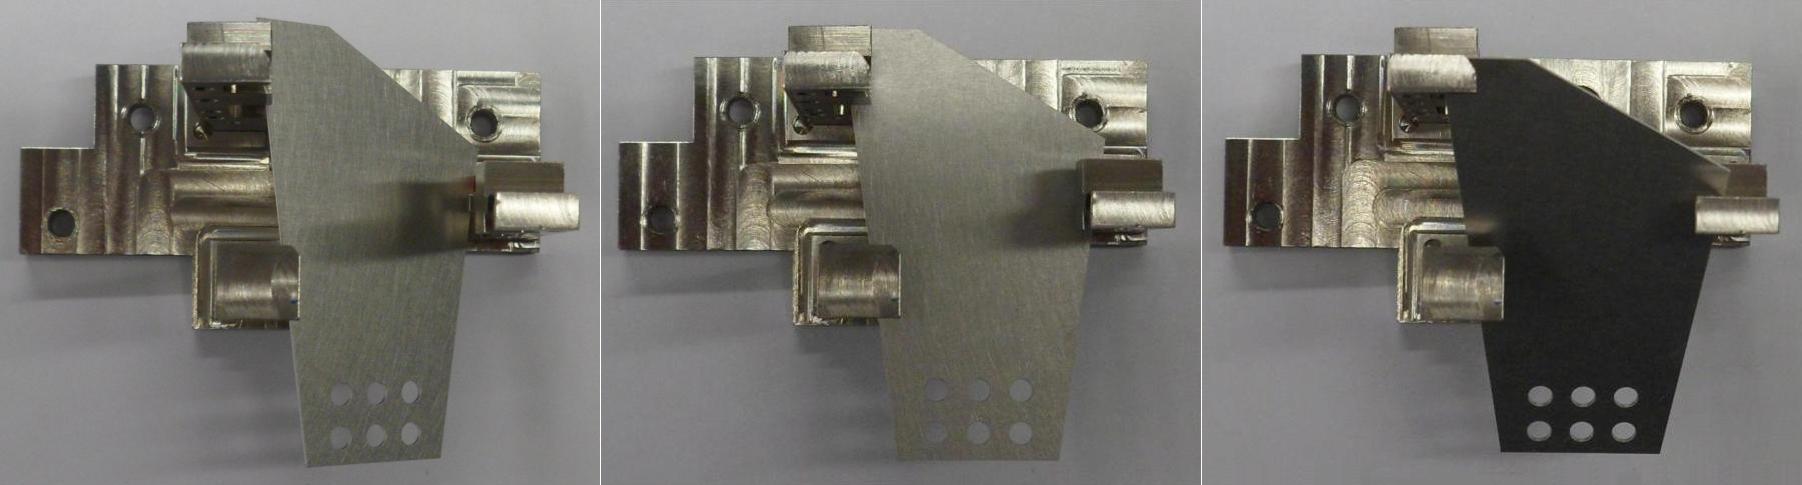 Tilted sample mount with sample plates mounted at (left) 30° yaw, (centre) flat and (right) 30° pitch orientations.